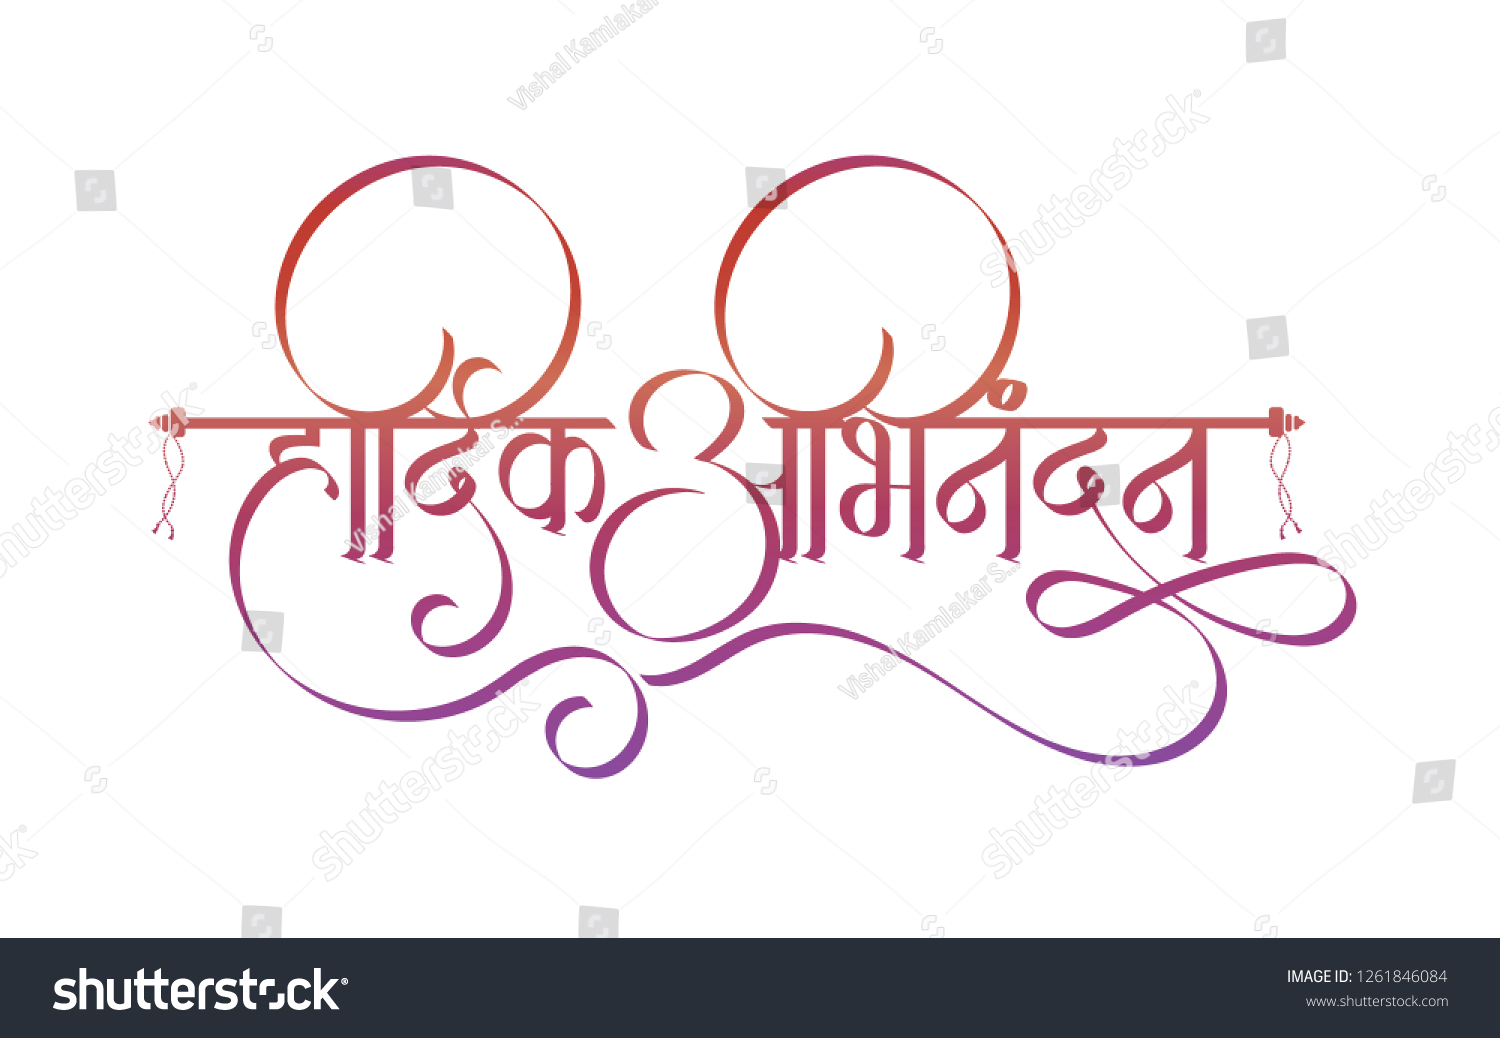 marathi calligraphy hearty congratulations congratulations wishes stock vector royalty free 1261846084 https www shutterstock com image vector marathi calligraphy hearty congratulations wishes text 1261846084